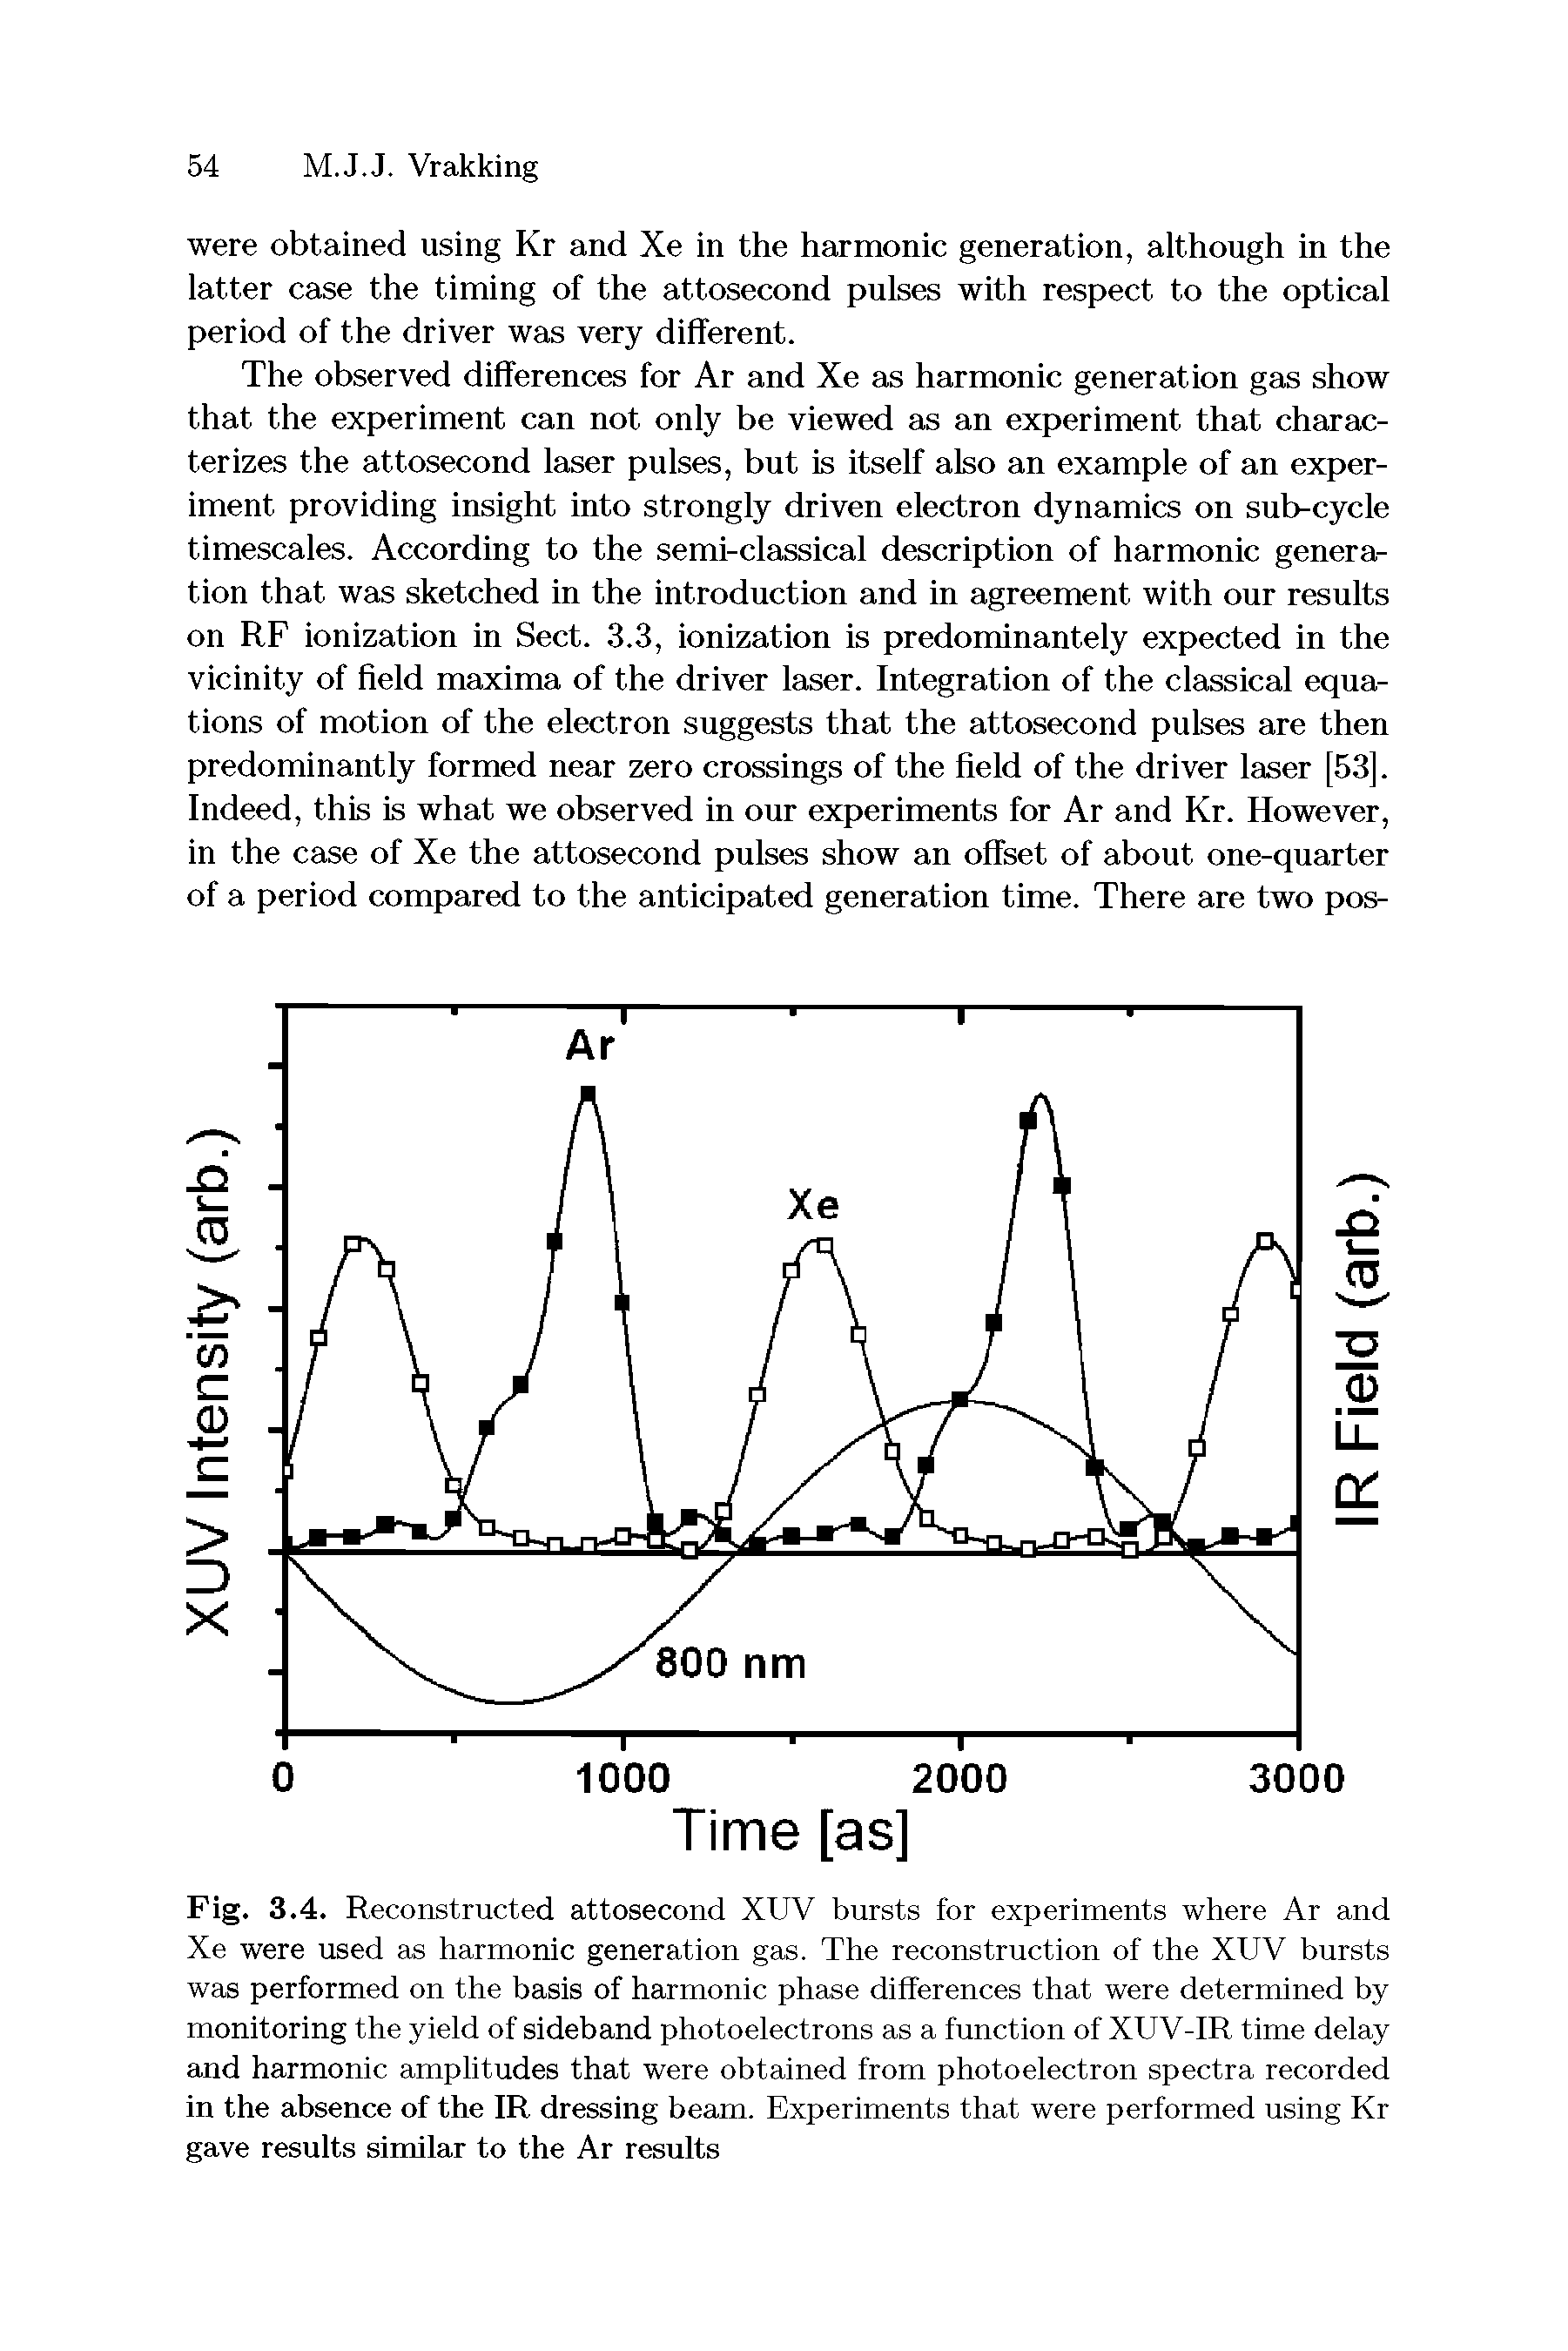 Fig. 3.4. Reconstructed attosecond XUV bursts for experiments where Ar and Xe were used as harmonic generation gas. The reconstruction of the XUV bursts was performed on the basis of harmonic phase differences that were determined by monitoring the yield of sideband photoelectrons as a function of XUV-IR time delay and harmonic amplitudes that were obtained from photoelectron spectra recorded in the absence of the IR dressing beam. Experiments that were performed using Kr gave results similar to the Ar results...